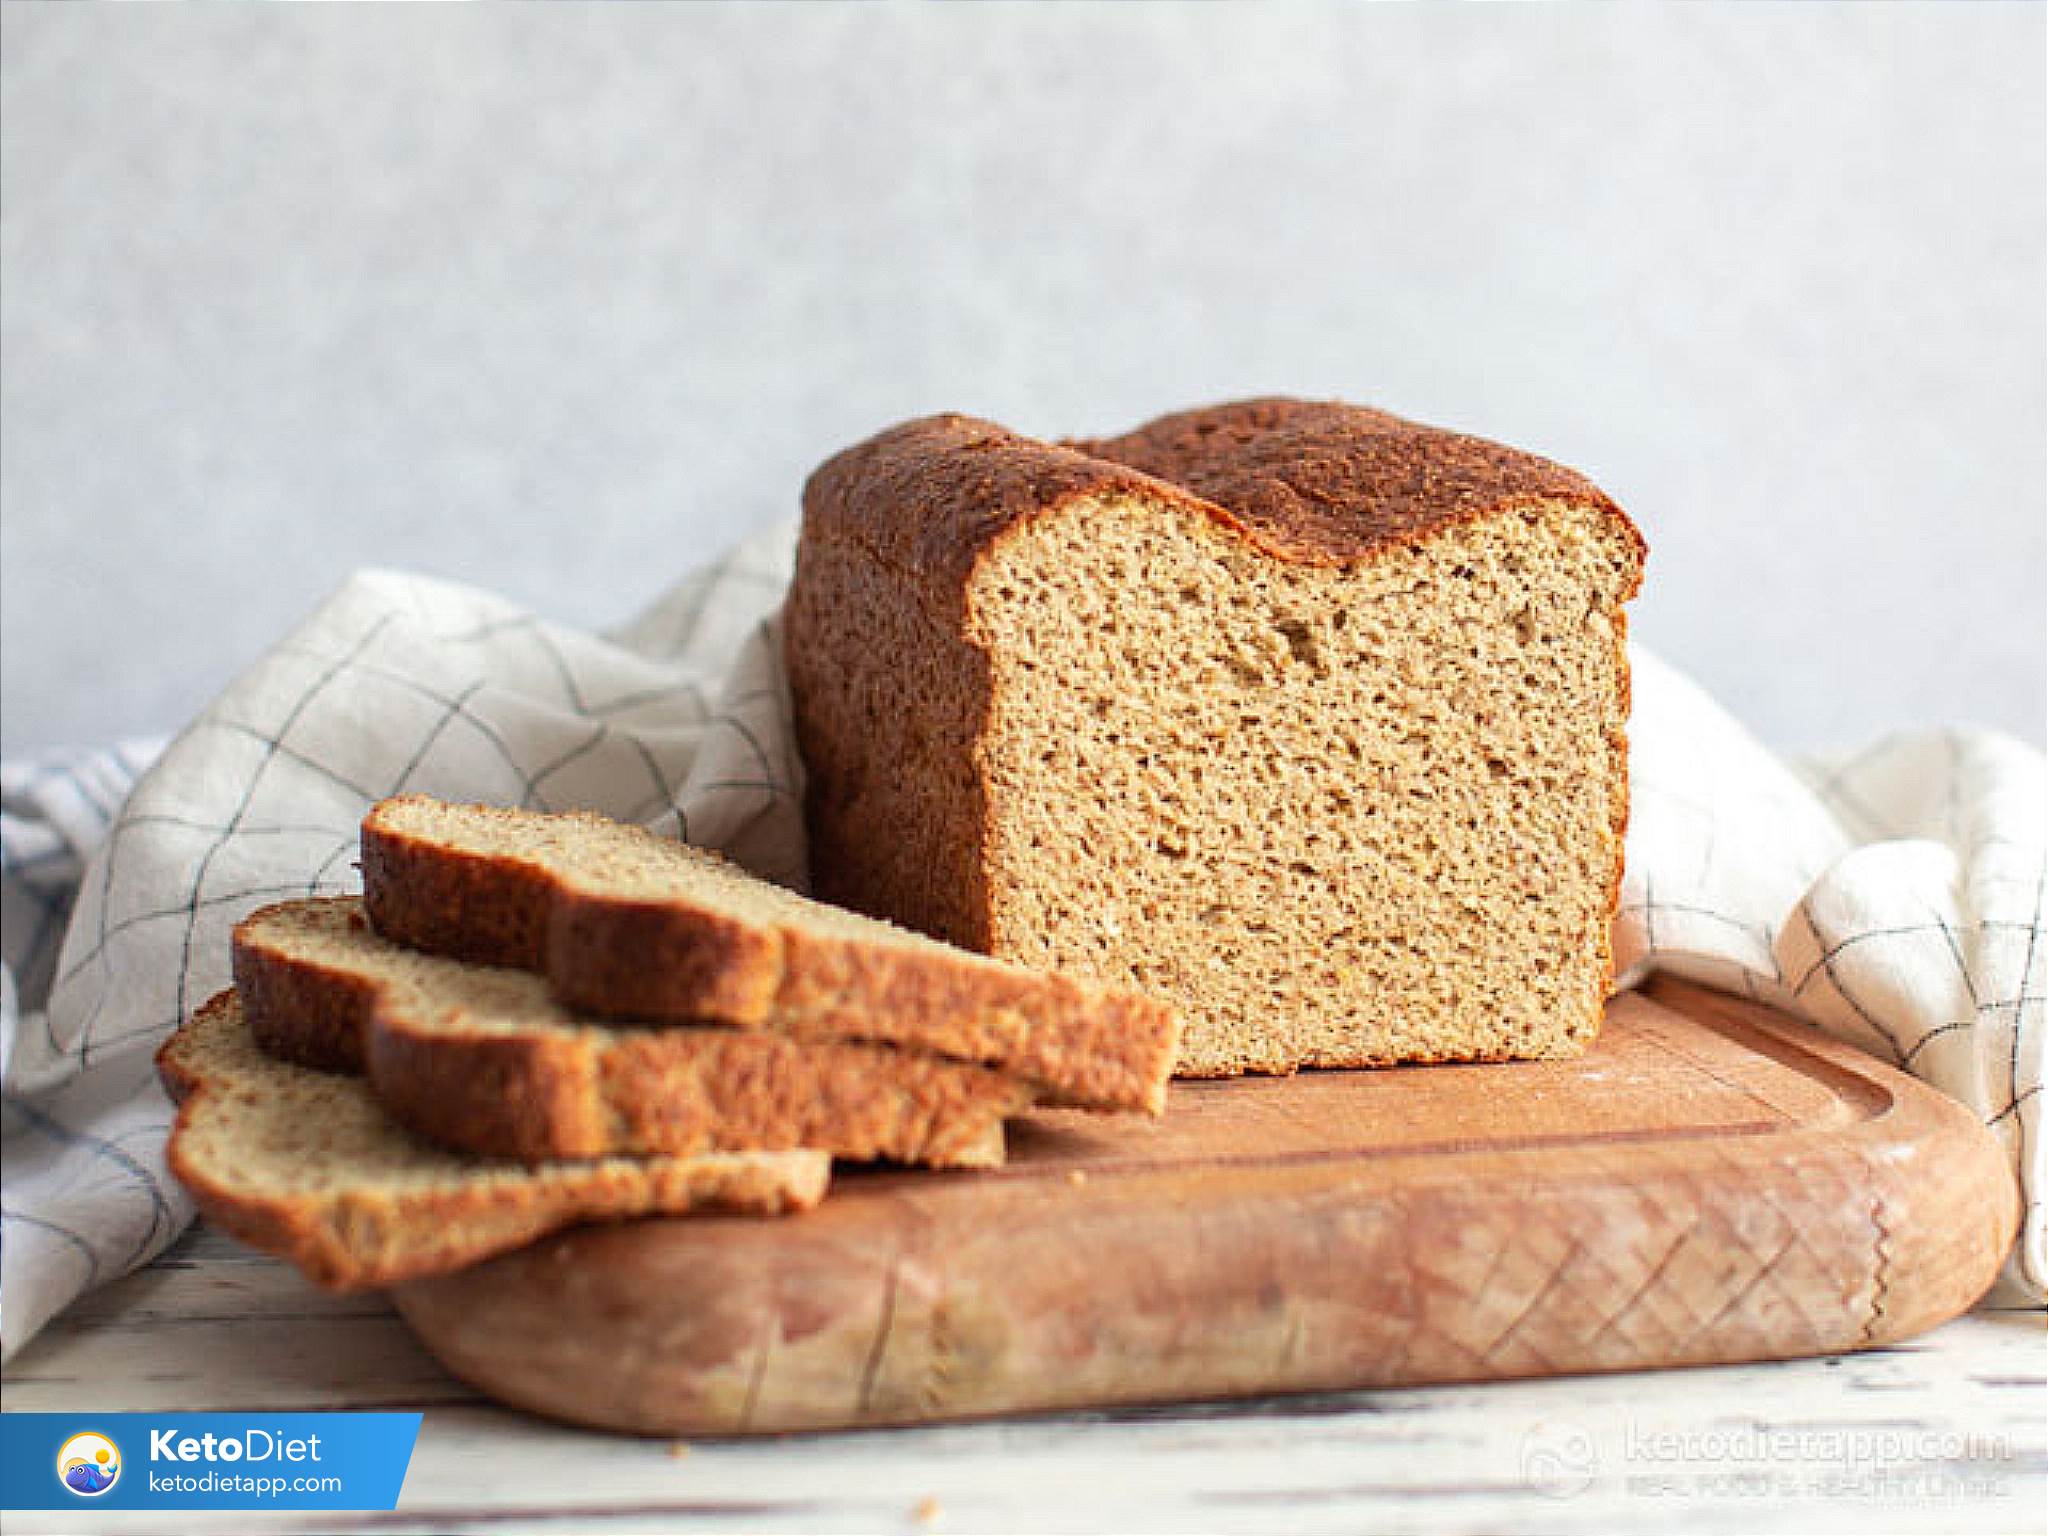 Low Carb Bread Recipe With Vital Wheat Gluten - Keto Bread With Yeast ...